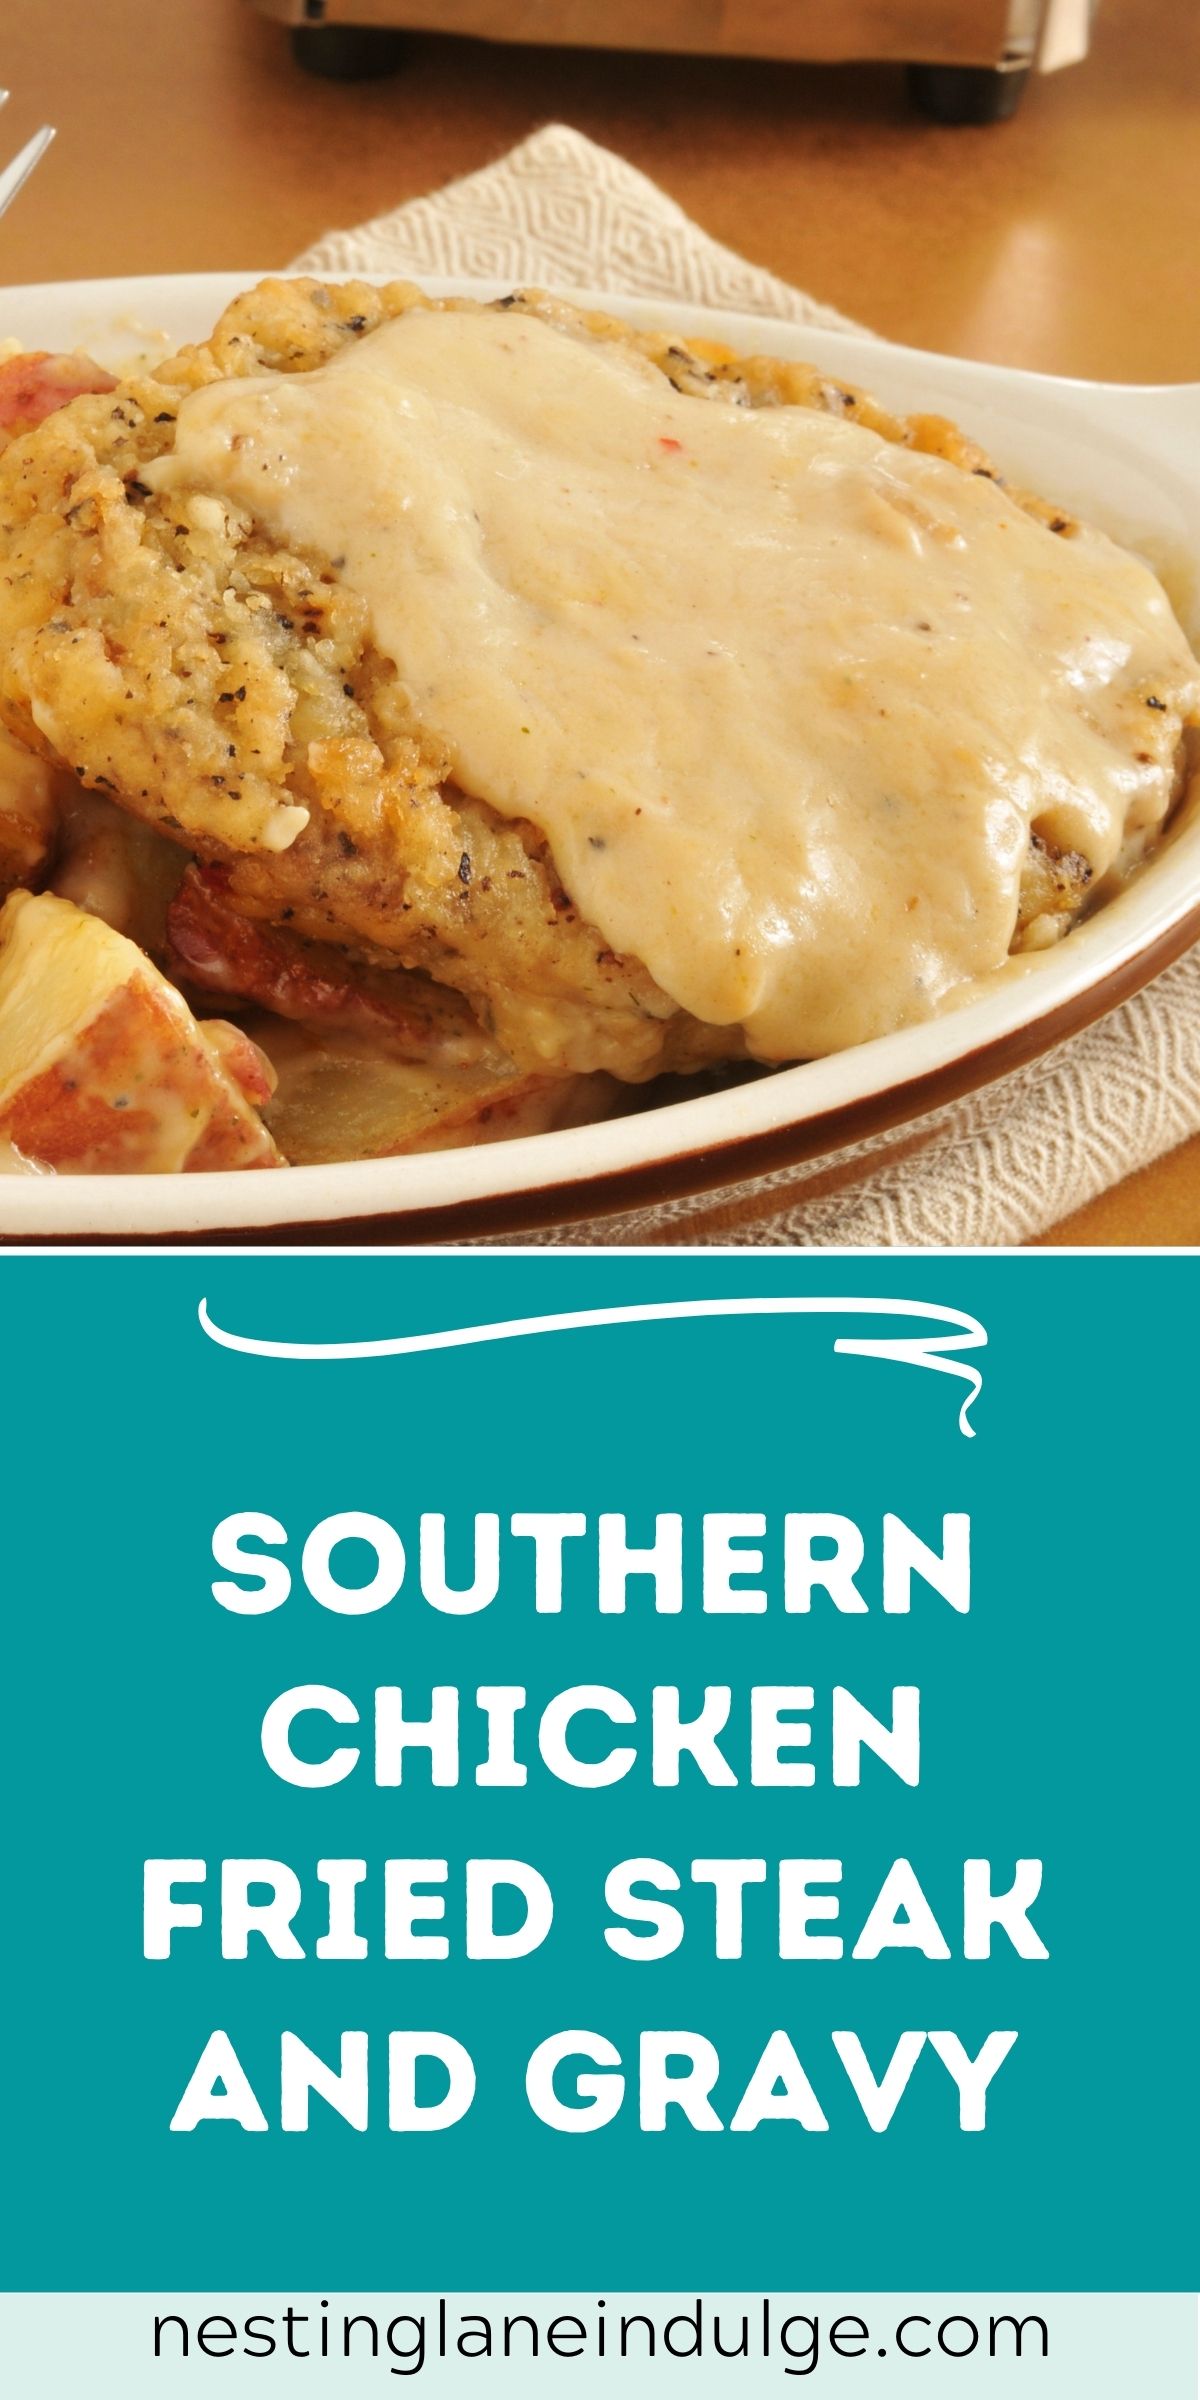 Graphic for Pinterest of Southern Chicken Fried Steak and Gravy Recipe.